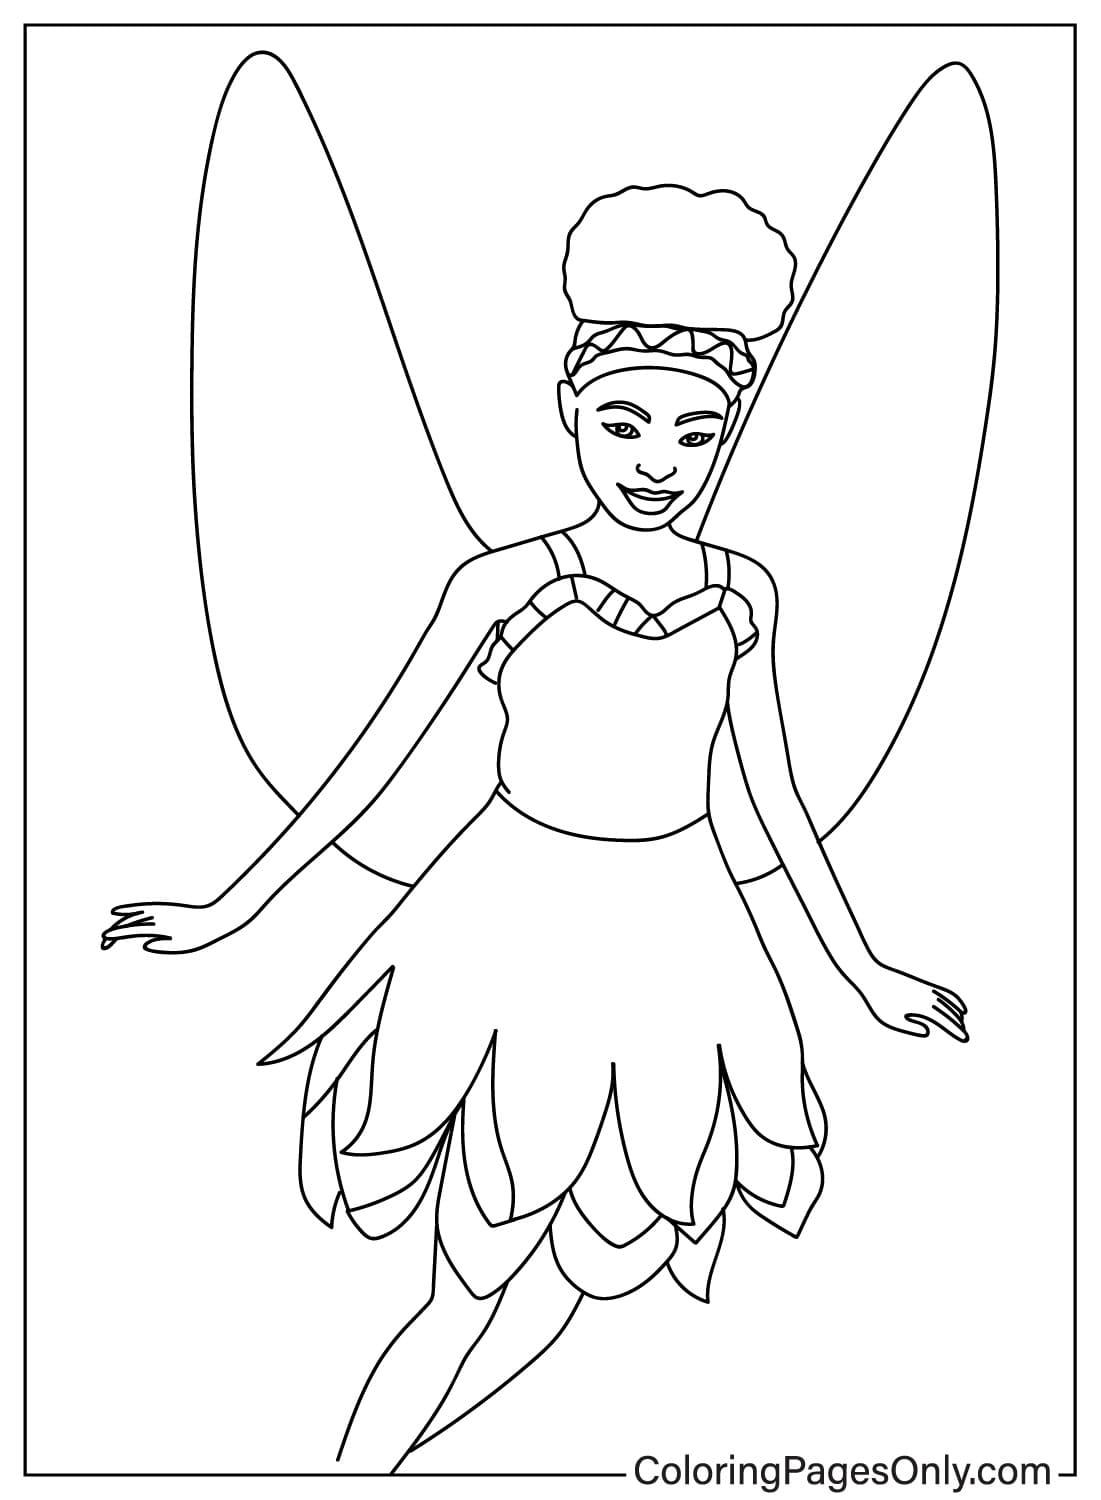 Tinkerbell Coloring Page Free